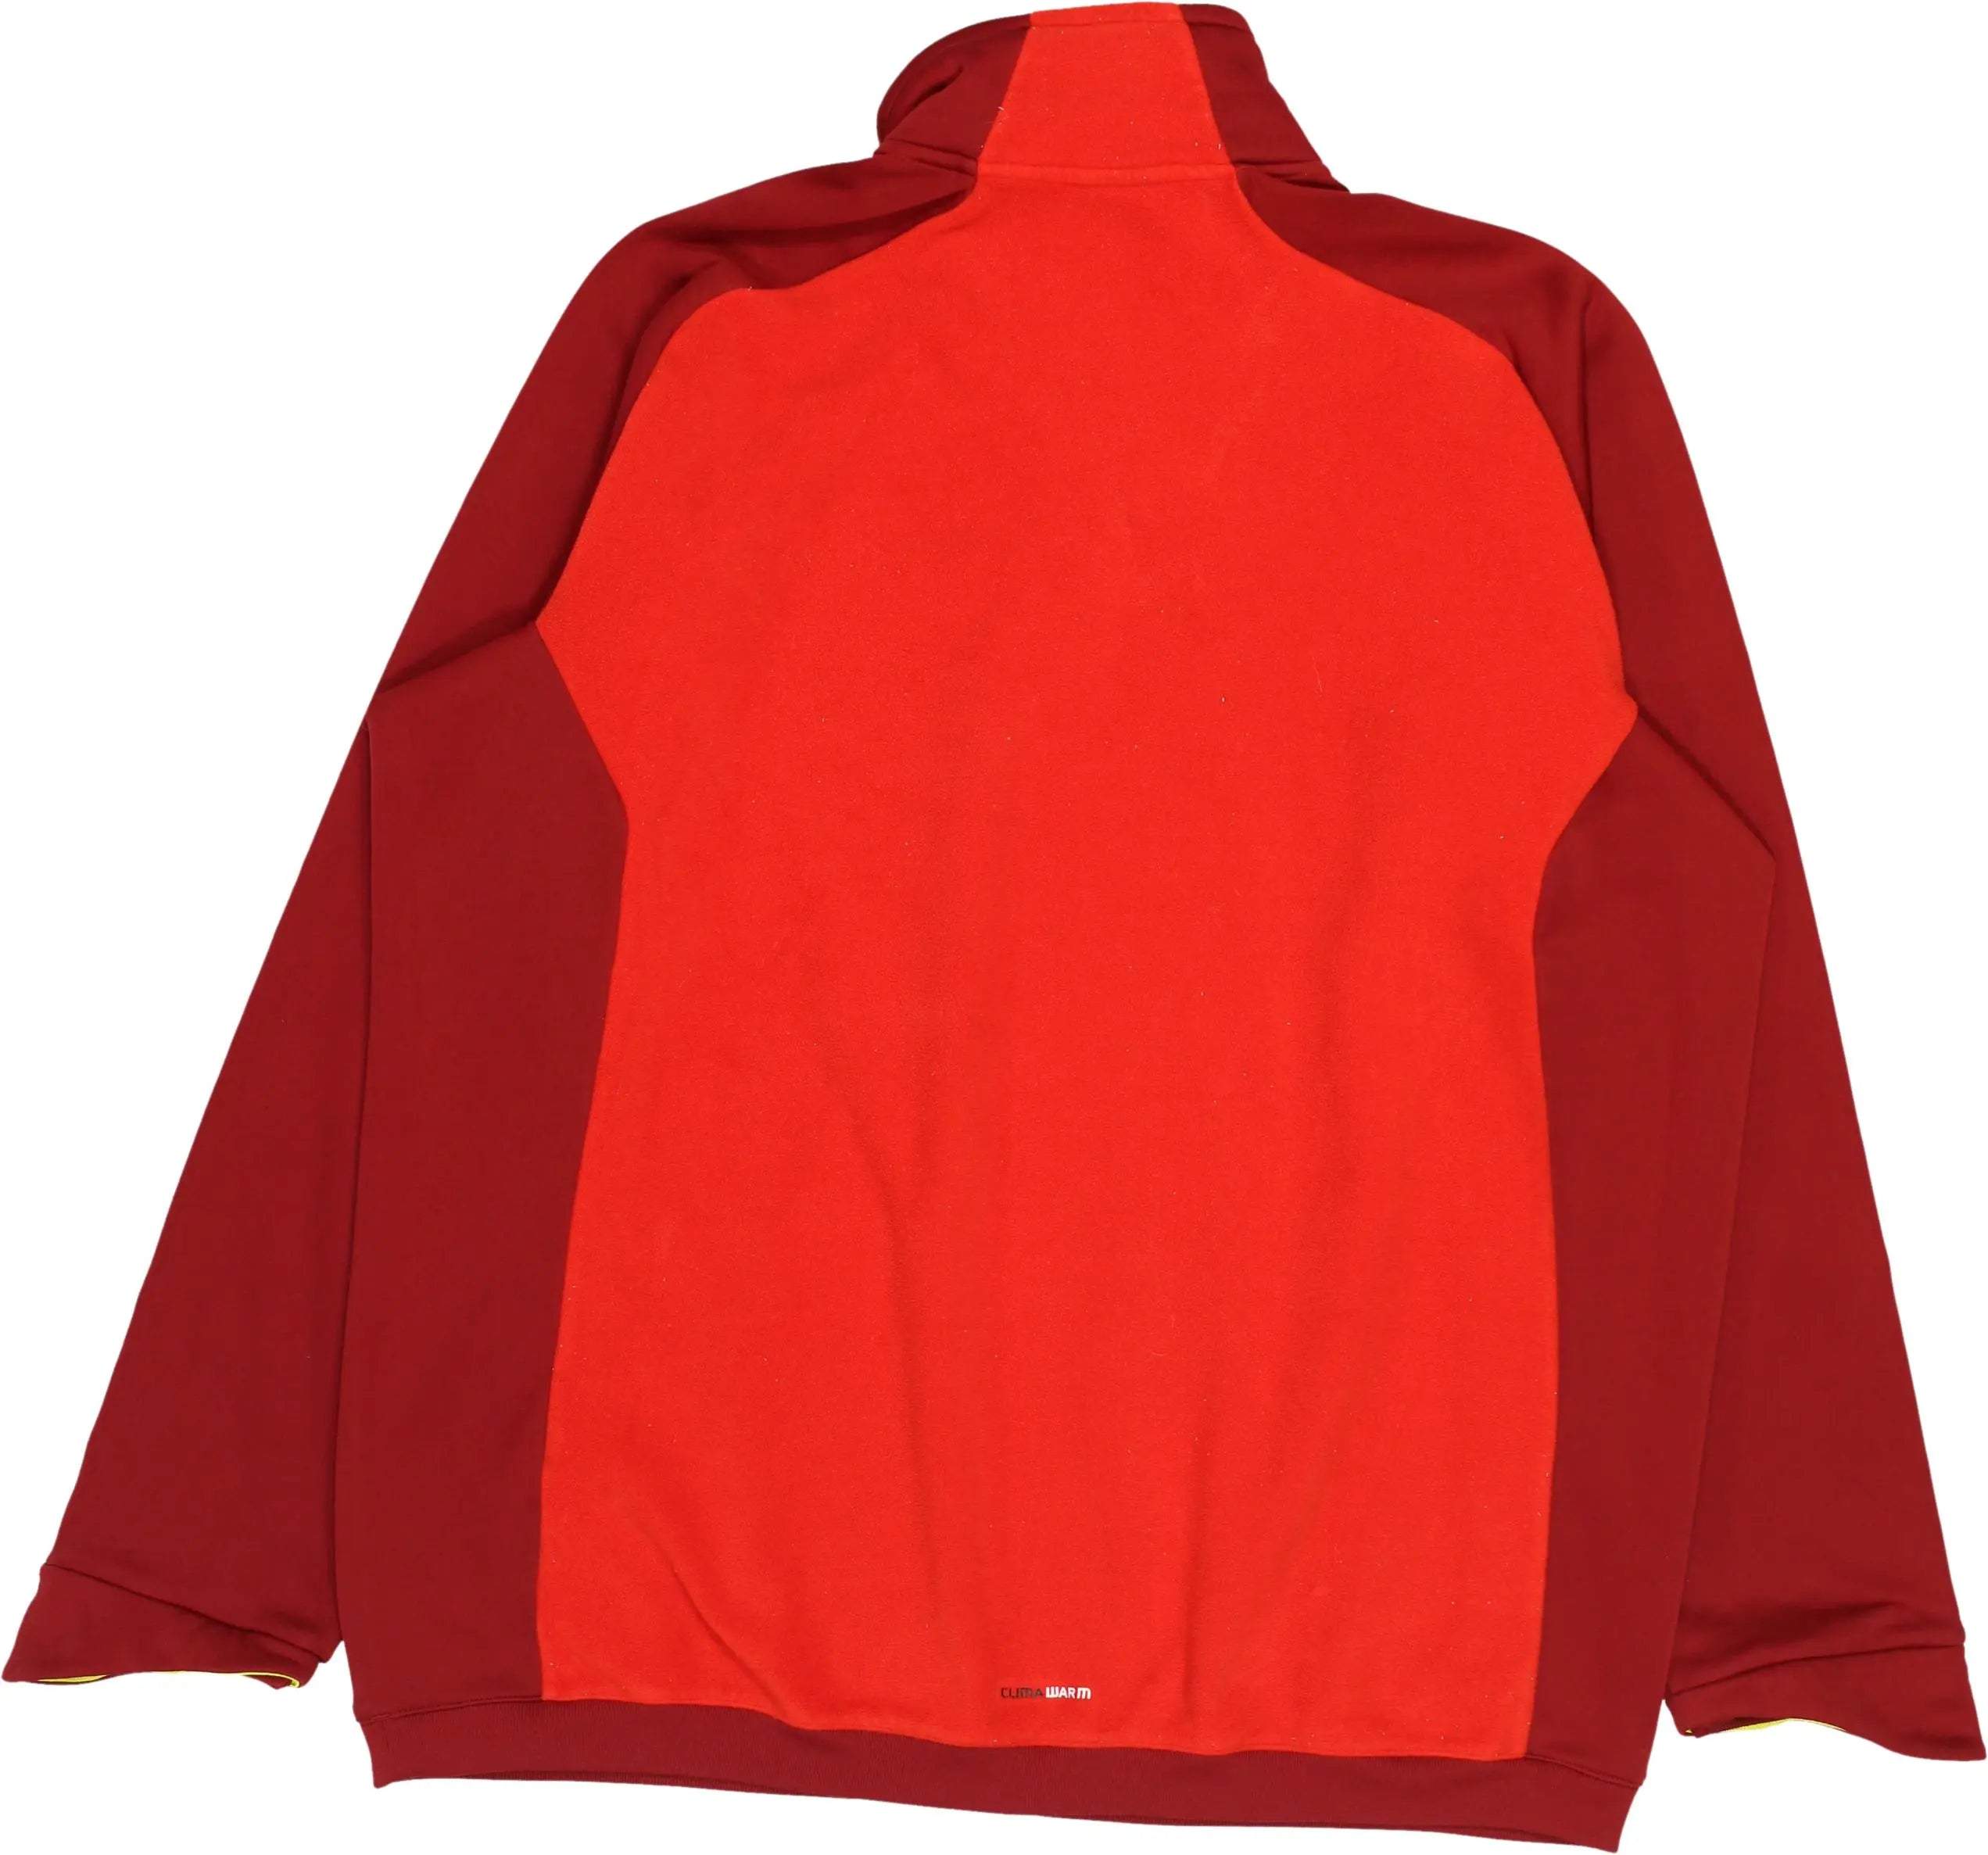 Adidas - Red Adidas zip-up sweater- ThriftTale.com - Vintage and second handclothing